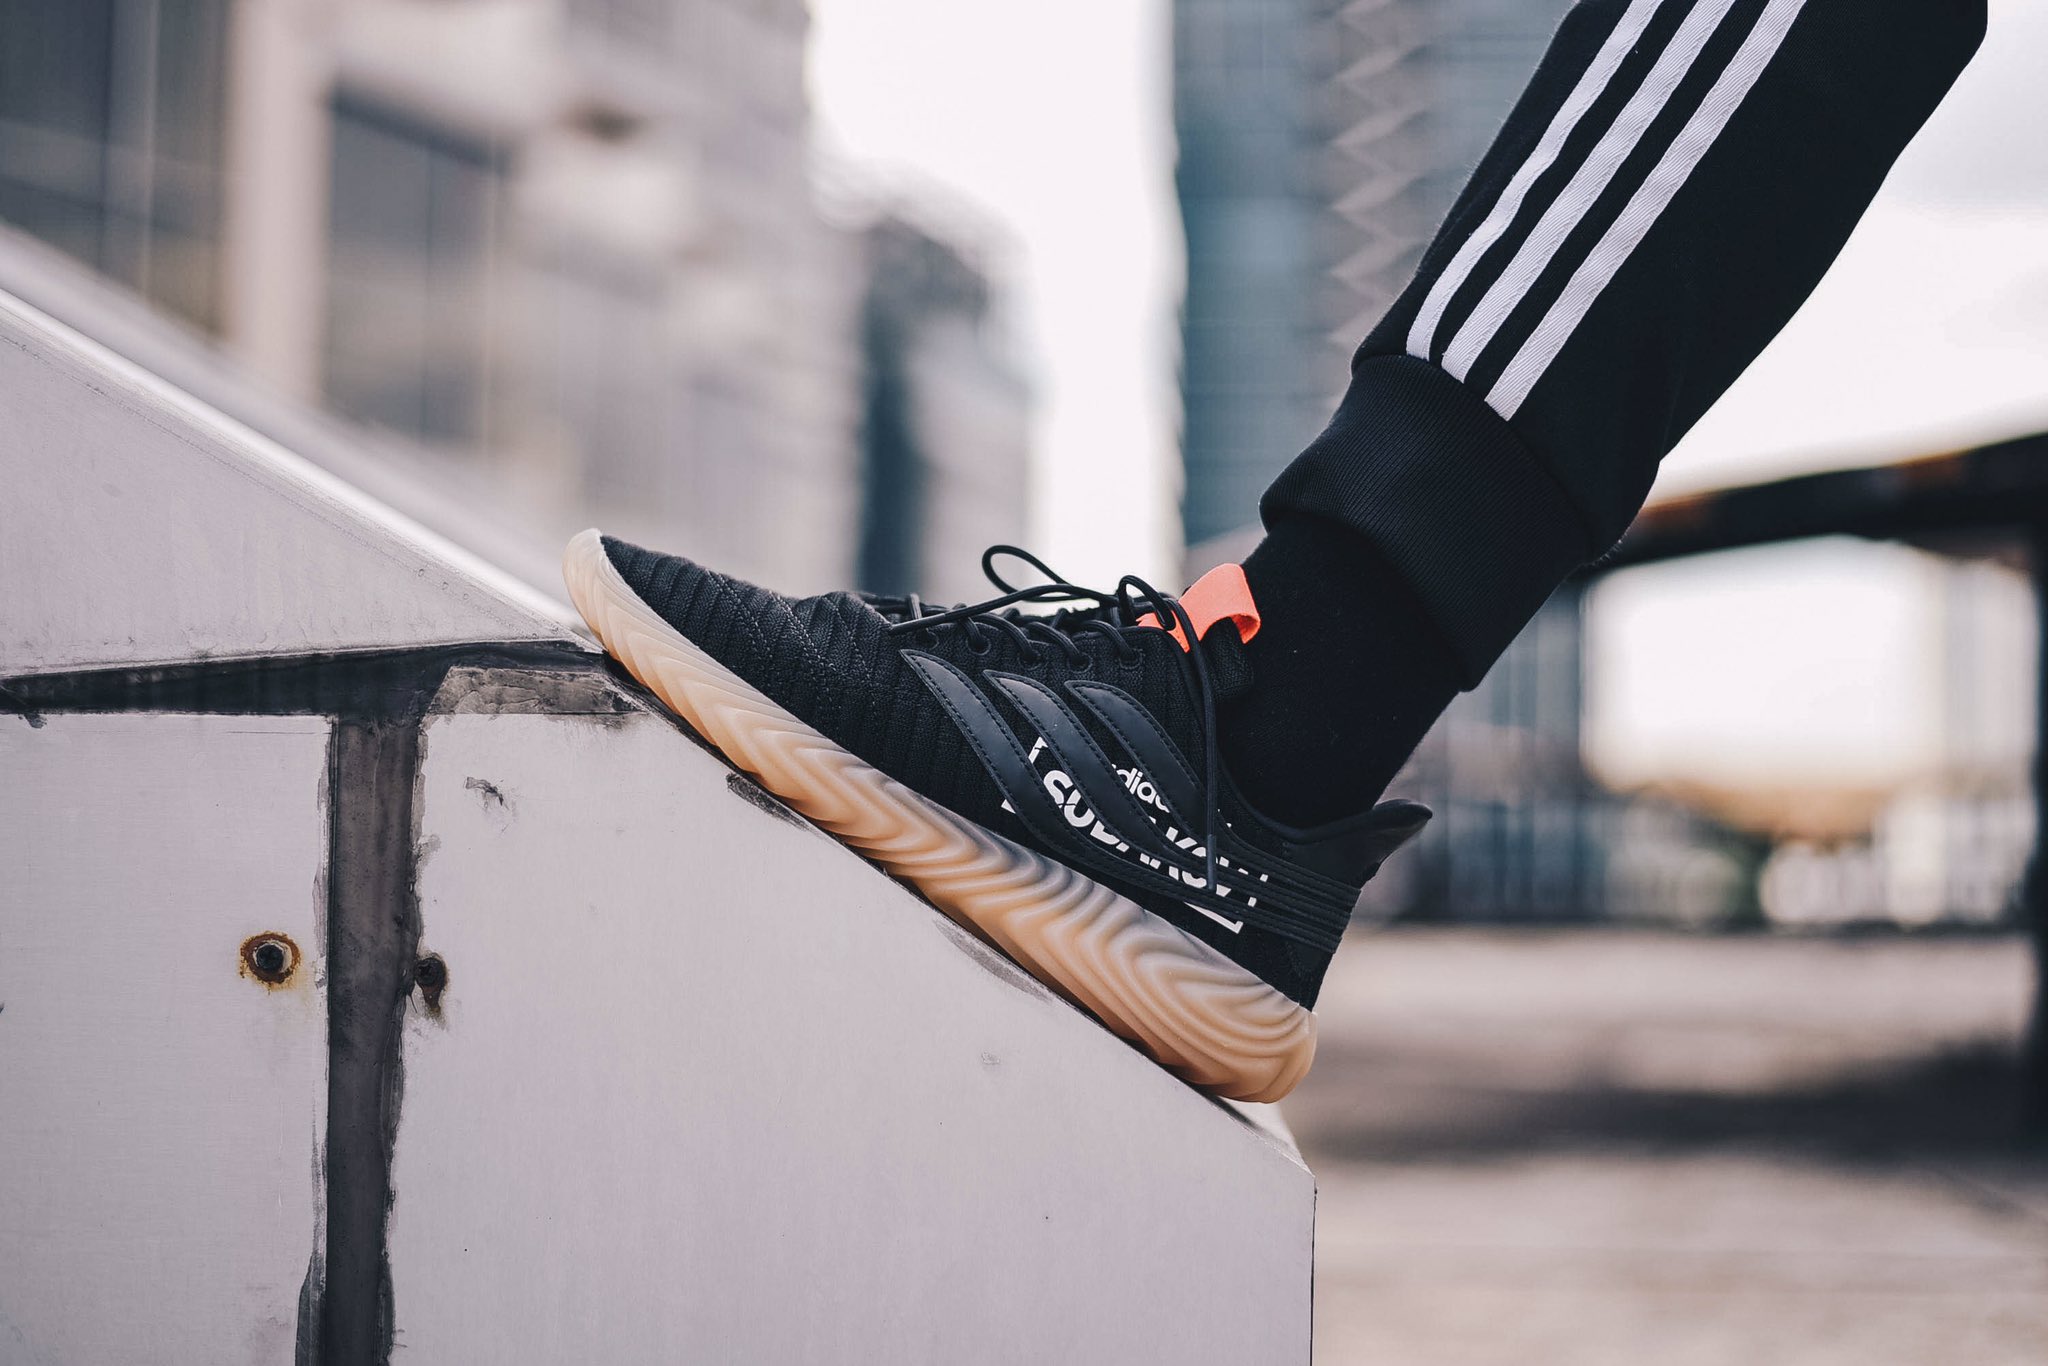 Exagerar Anguila Hospitalidad Sole What on Twitter: "Adidas Originals Sobakov “Alphatype”. This pair is  heavily inspired by the football culture, and it features a soft and  flexible upper, and its signature side stripes sitting on